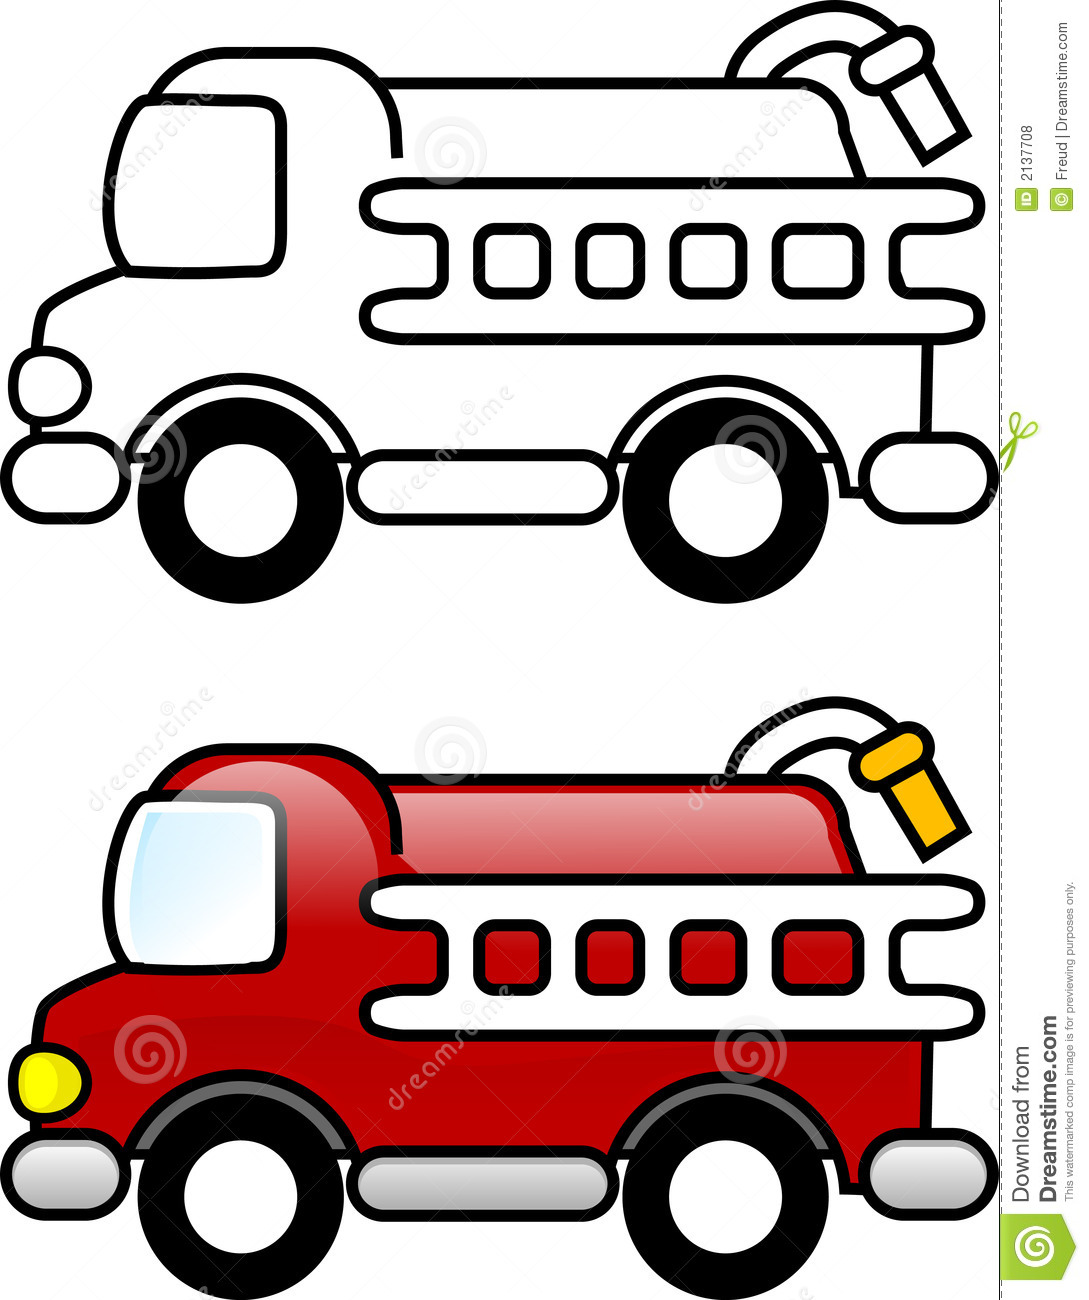 Preschool Fire Truck Coloring Pages